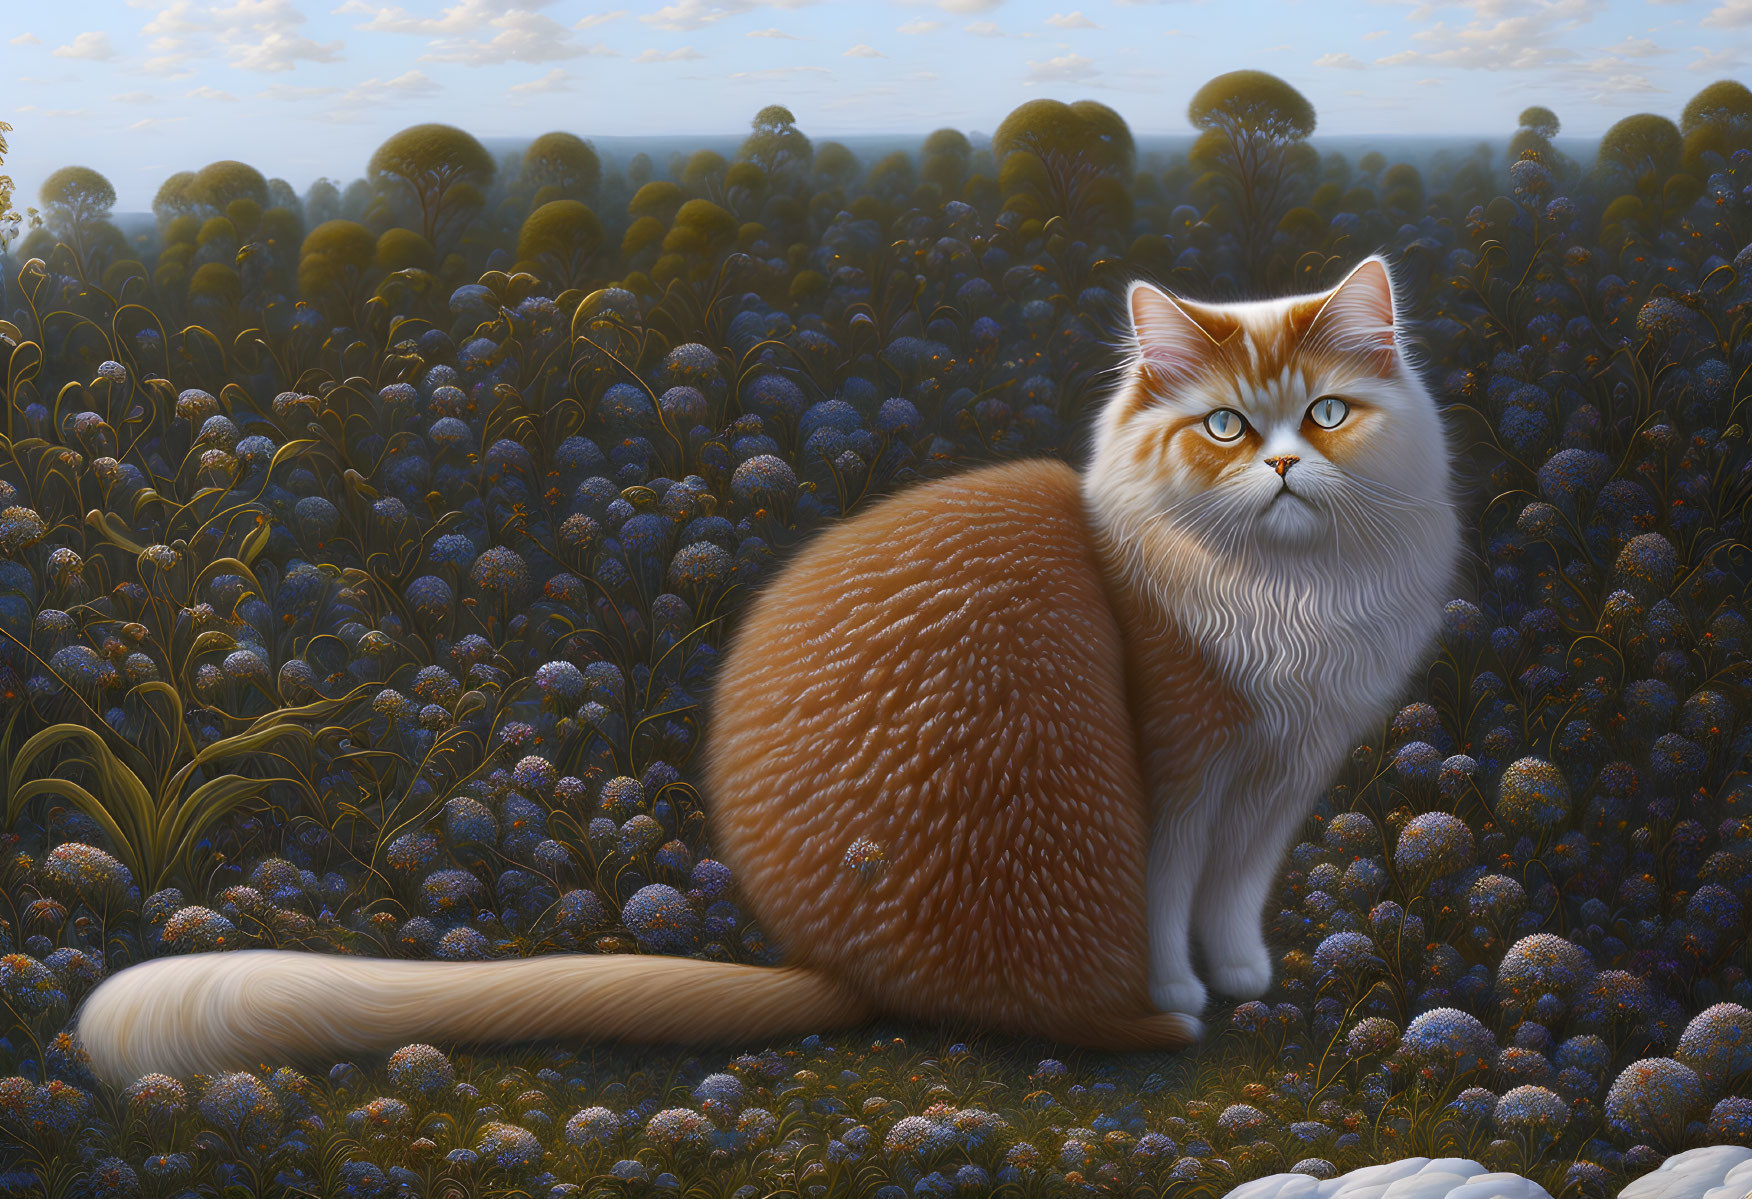 Fluffy orange and white cat in dreamy landscape with blue eyes